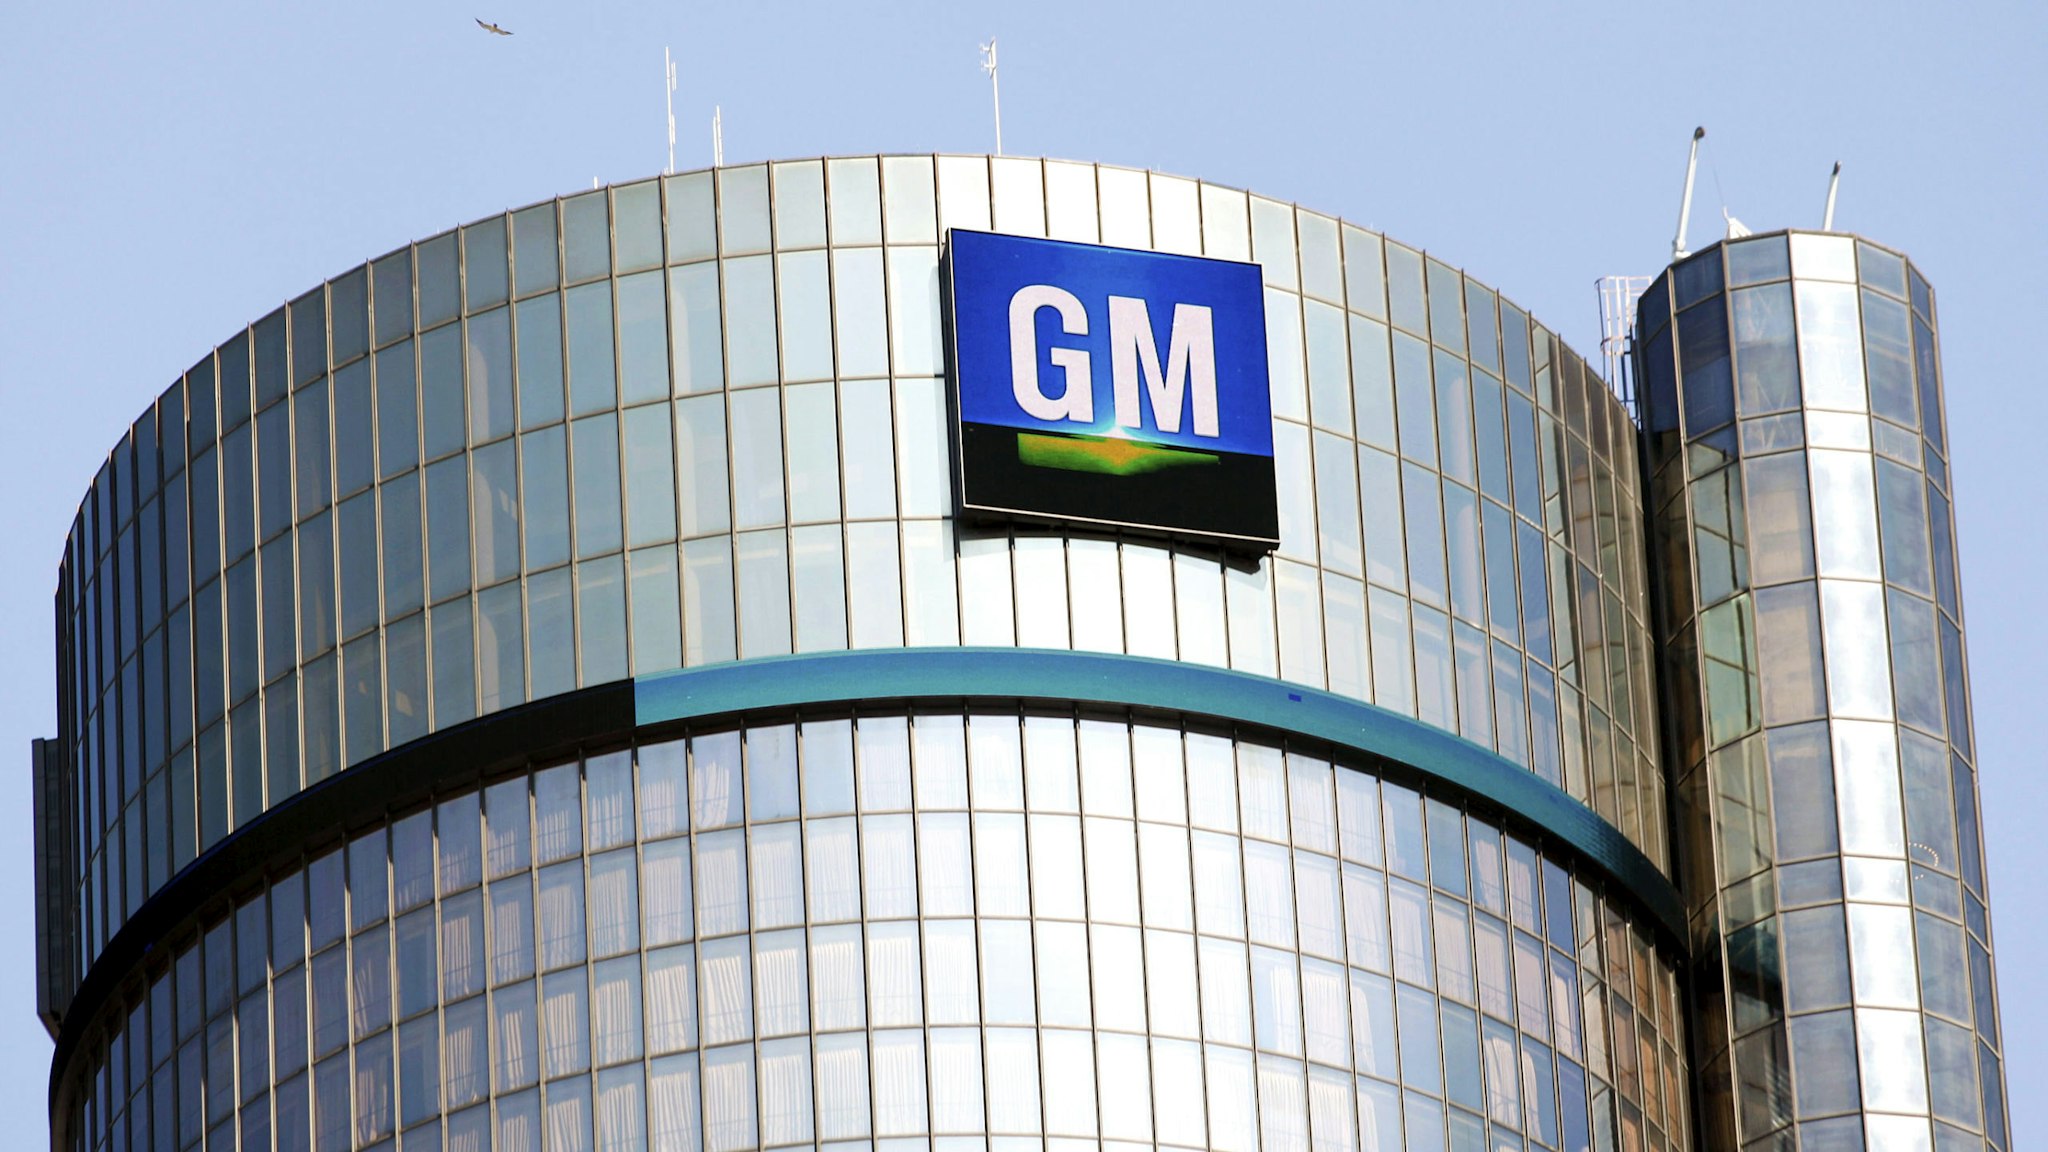 DETROIT, MI - SEPTEMBER 17: The General Motors logo on the world headquarters building is shown September 17, 2015 in Detroit, Michigan. Mary Barra, Chief Executive Officer of General Motors, and Mark Reuss, President of GM North America, held an Employee Town Hall Meeting and a question &amp; answer session with the news media today to discuss GM's $900 million settlement with the Justice Department over GM's ignition switch recalls.